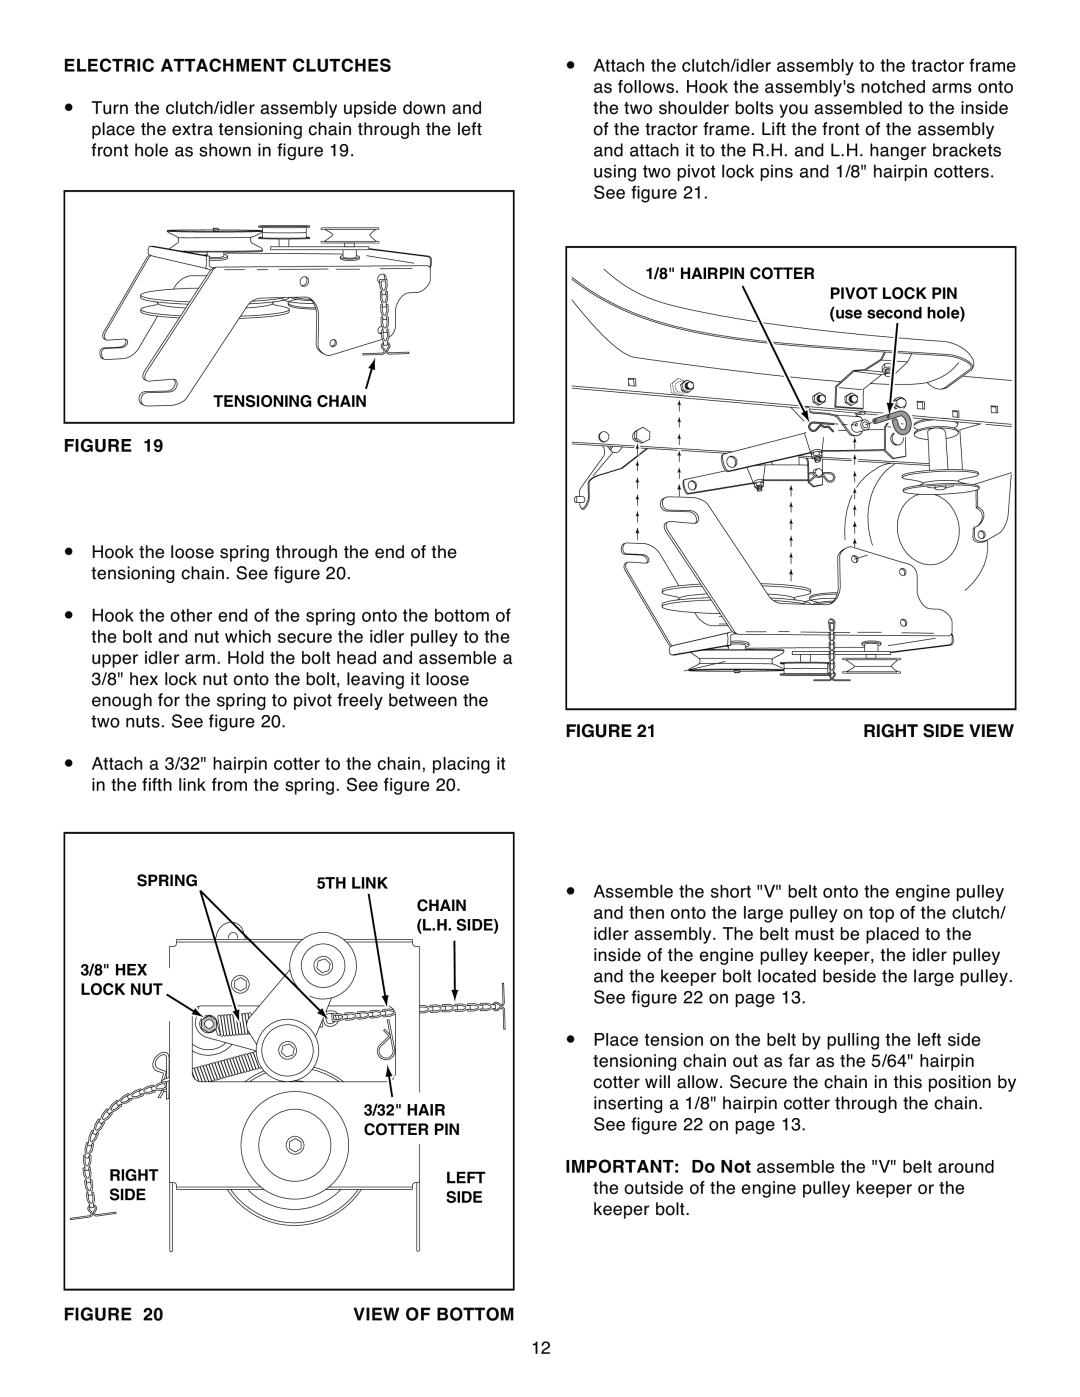 Sears 486.248392 owner manual Electric Attachment Clutches, View Of Bottom, Right Side View 